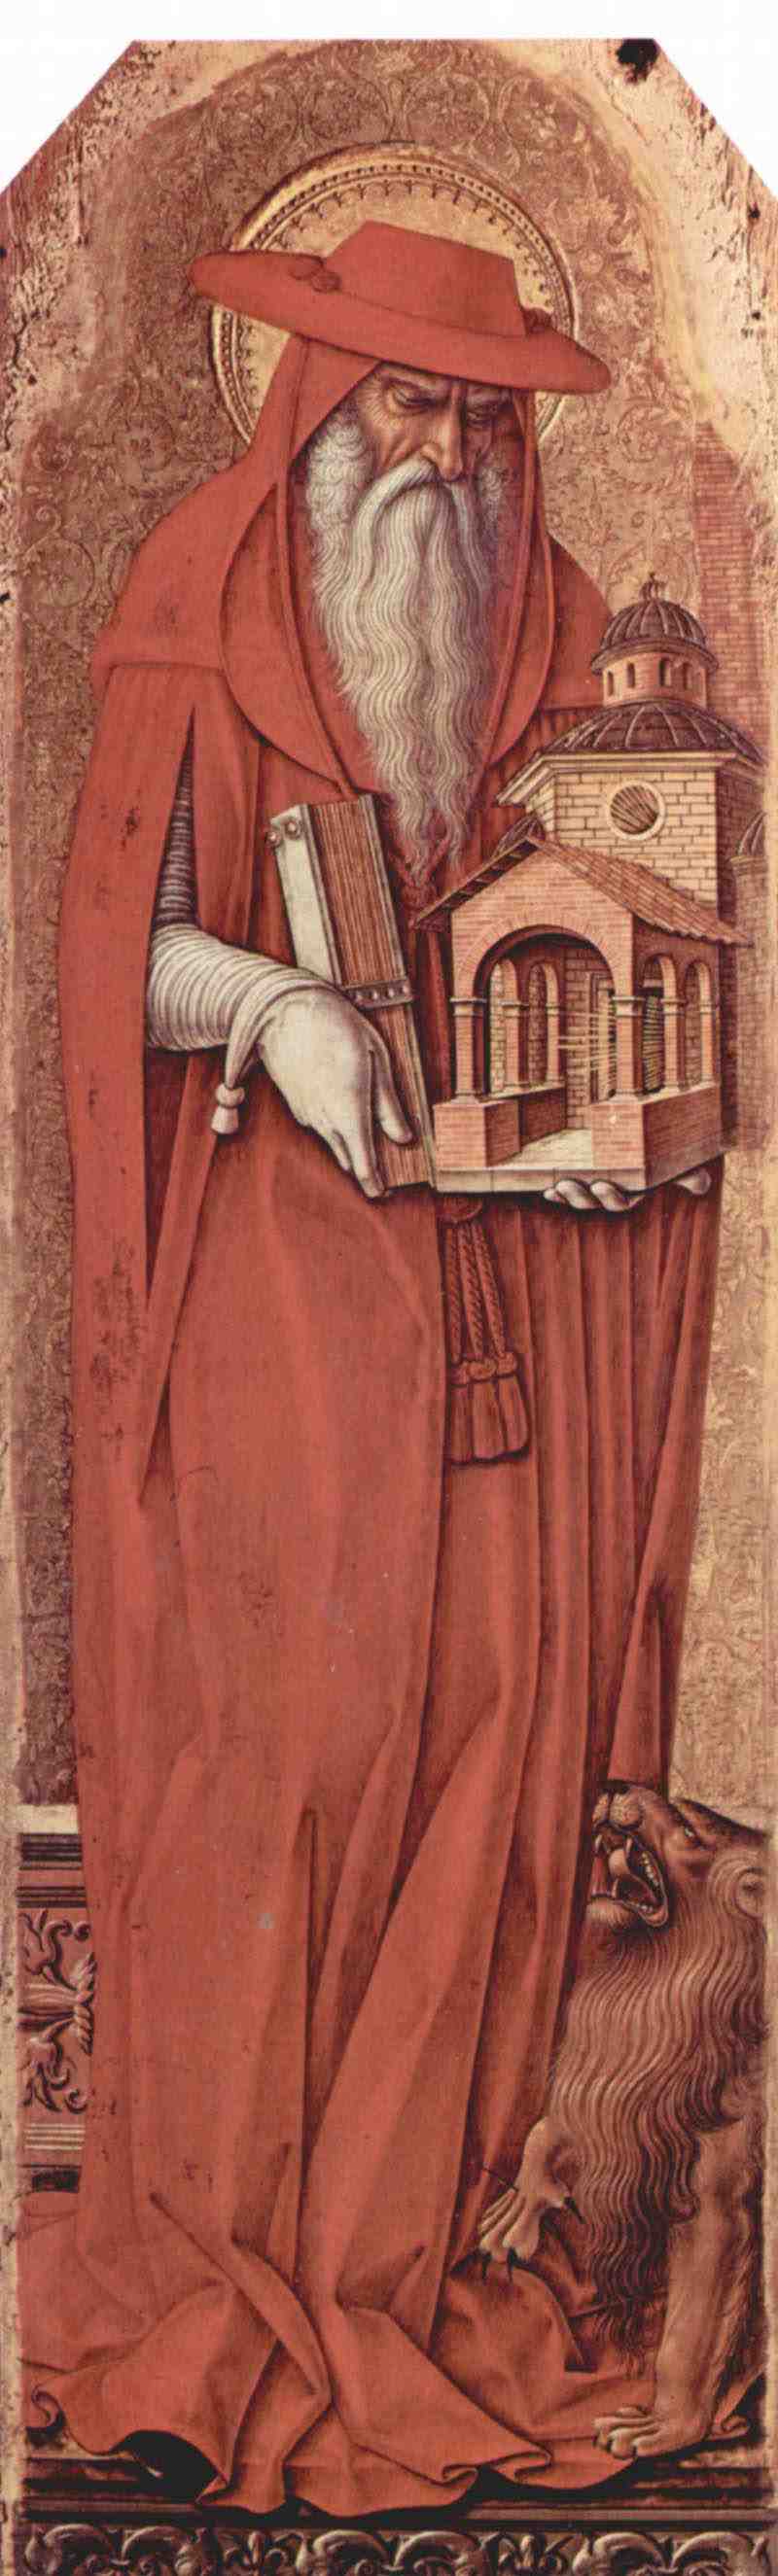 Altarpolyptychon of St. Peter Martyr, left inner wing scene: St. Jerome. Carlo Crivelli